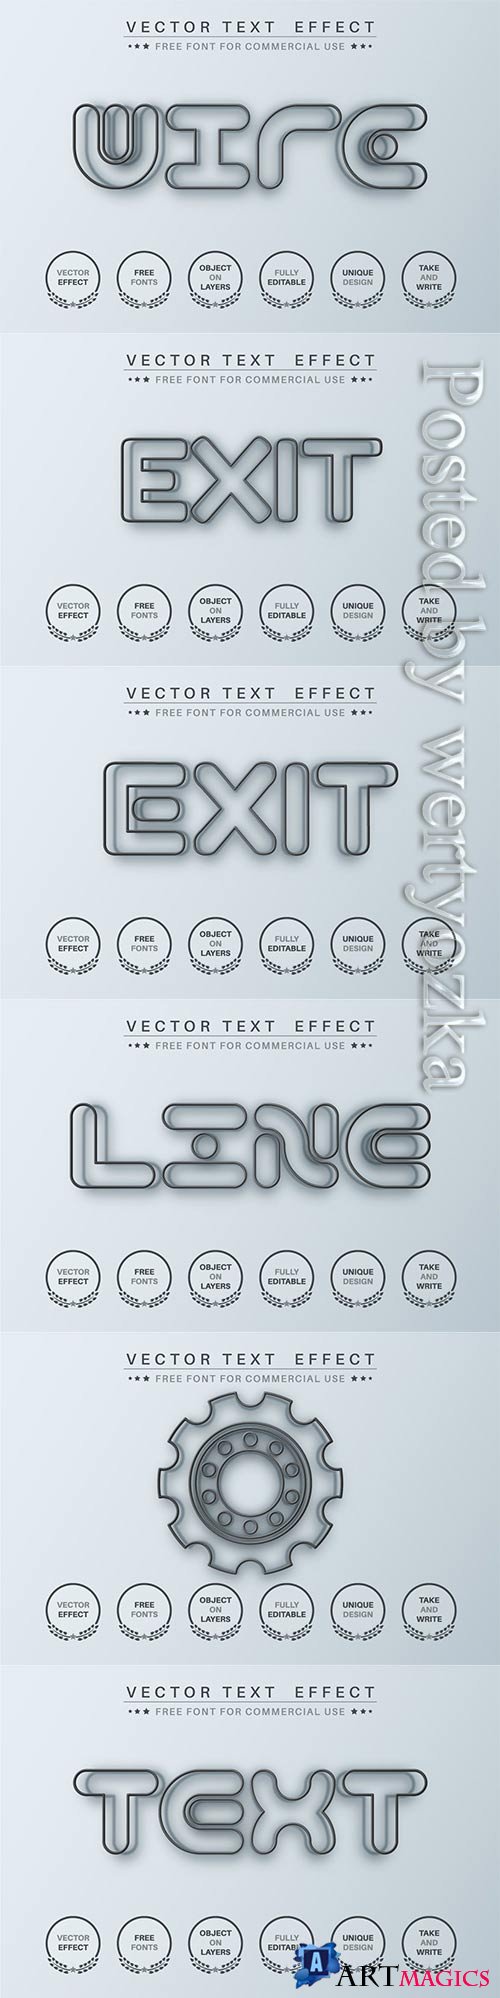 Black wire - editable text effect, font style